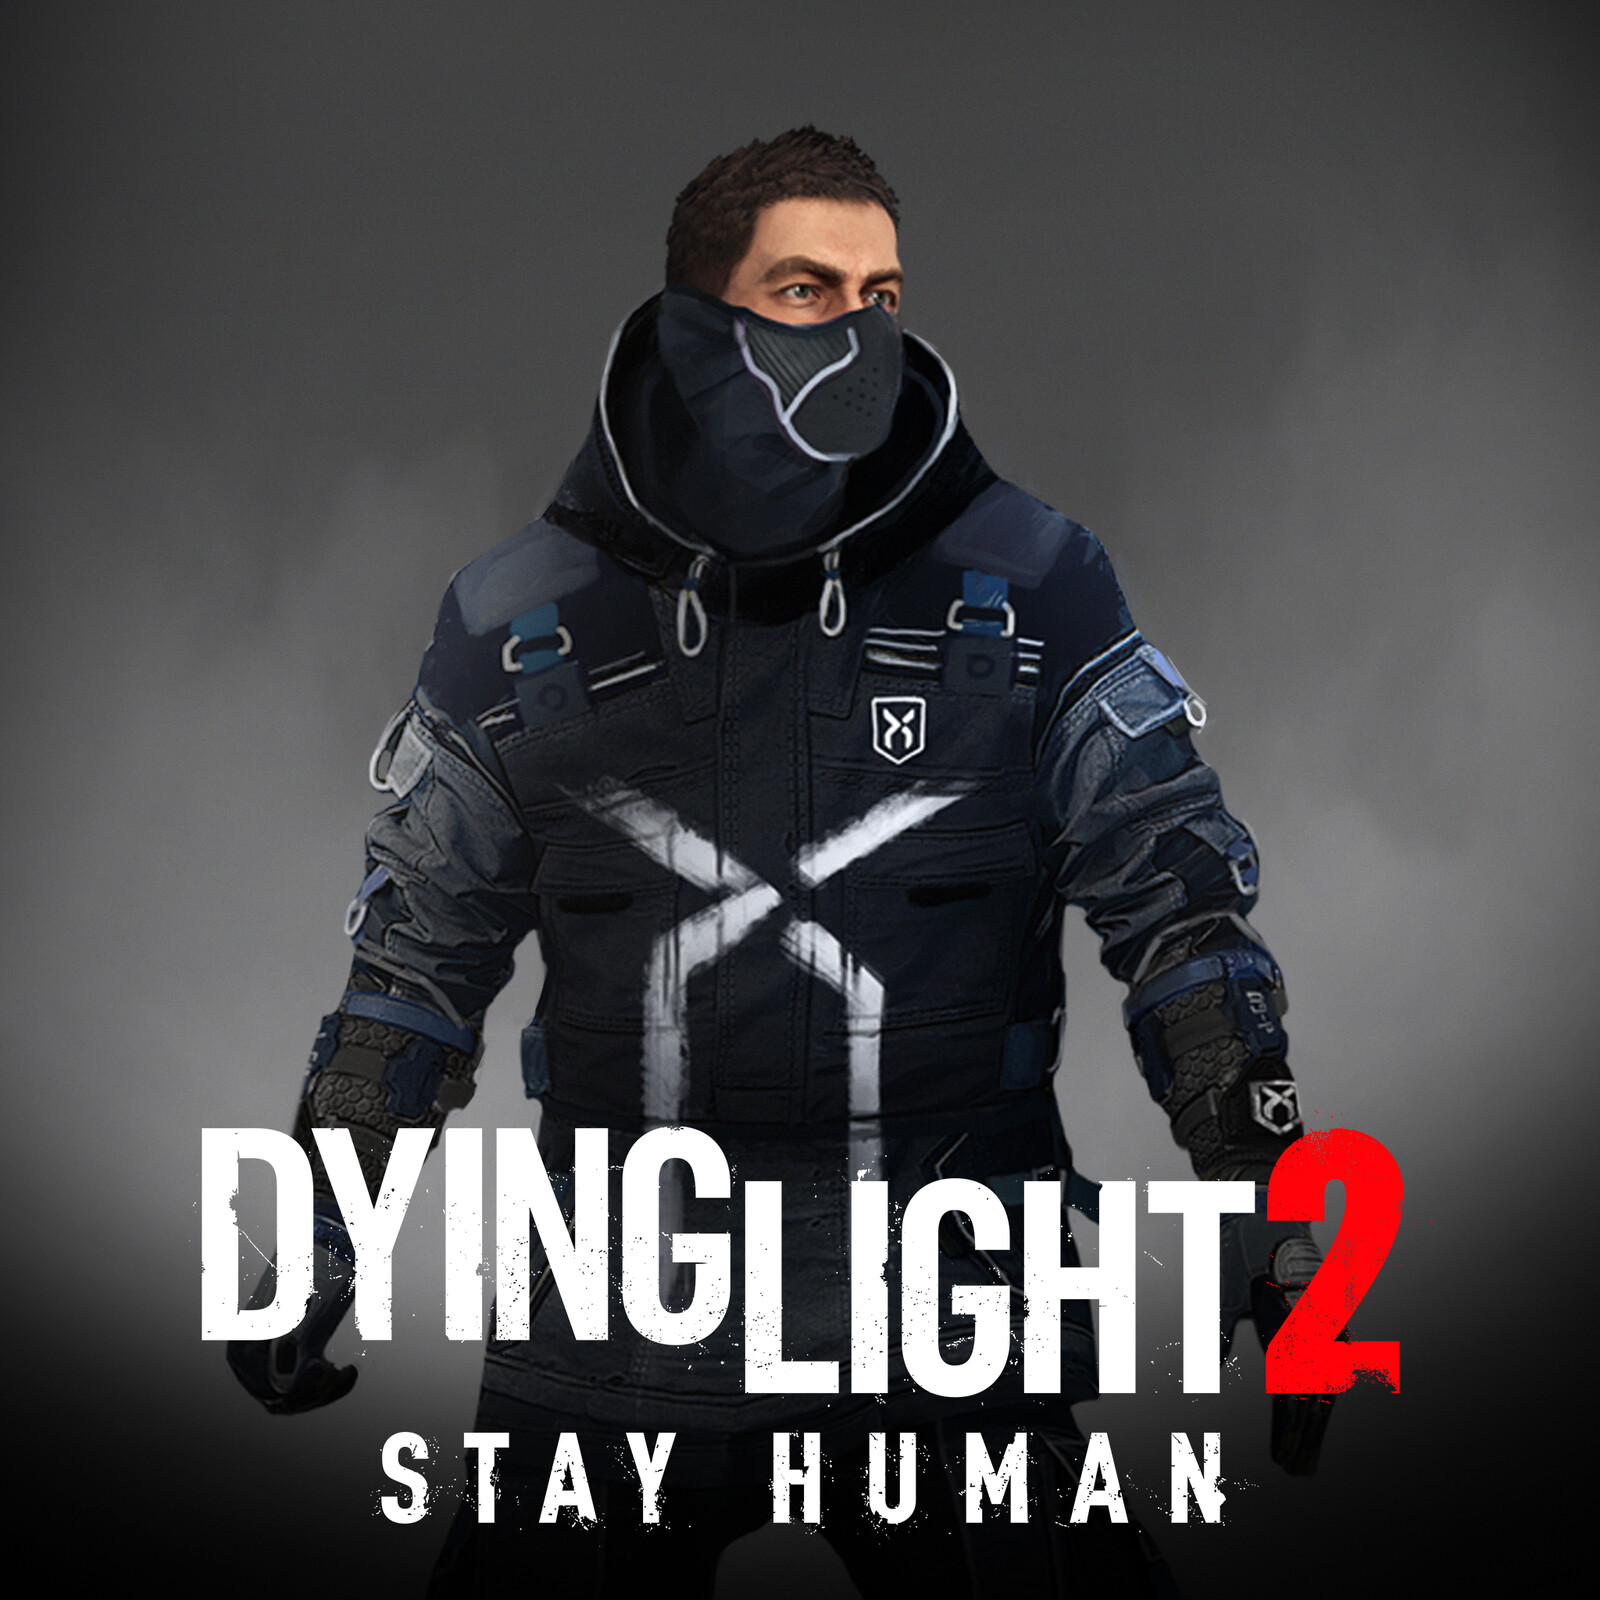 Dying Light 2 Stay Human - Peacekeeper Outfit for Aiden